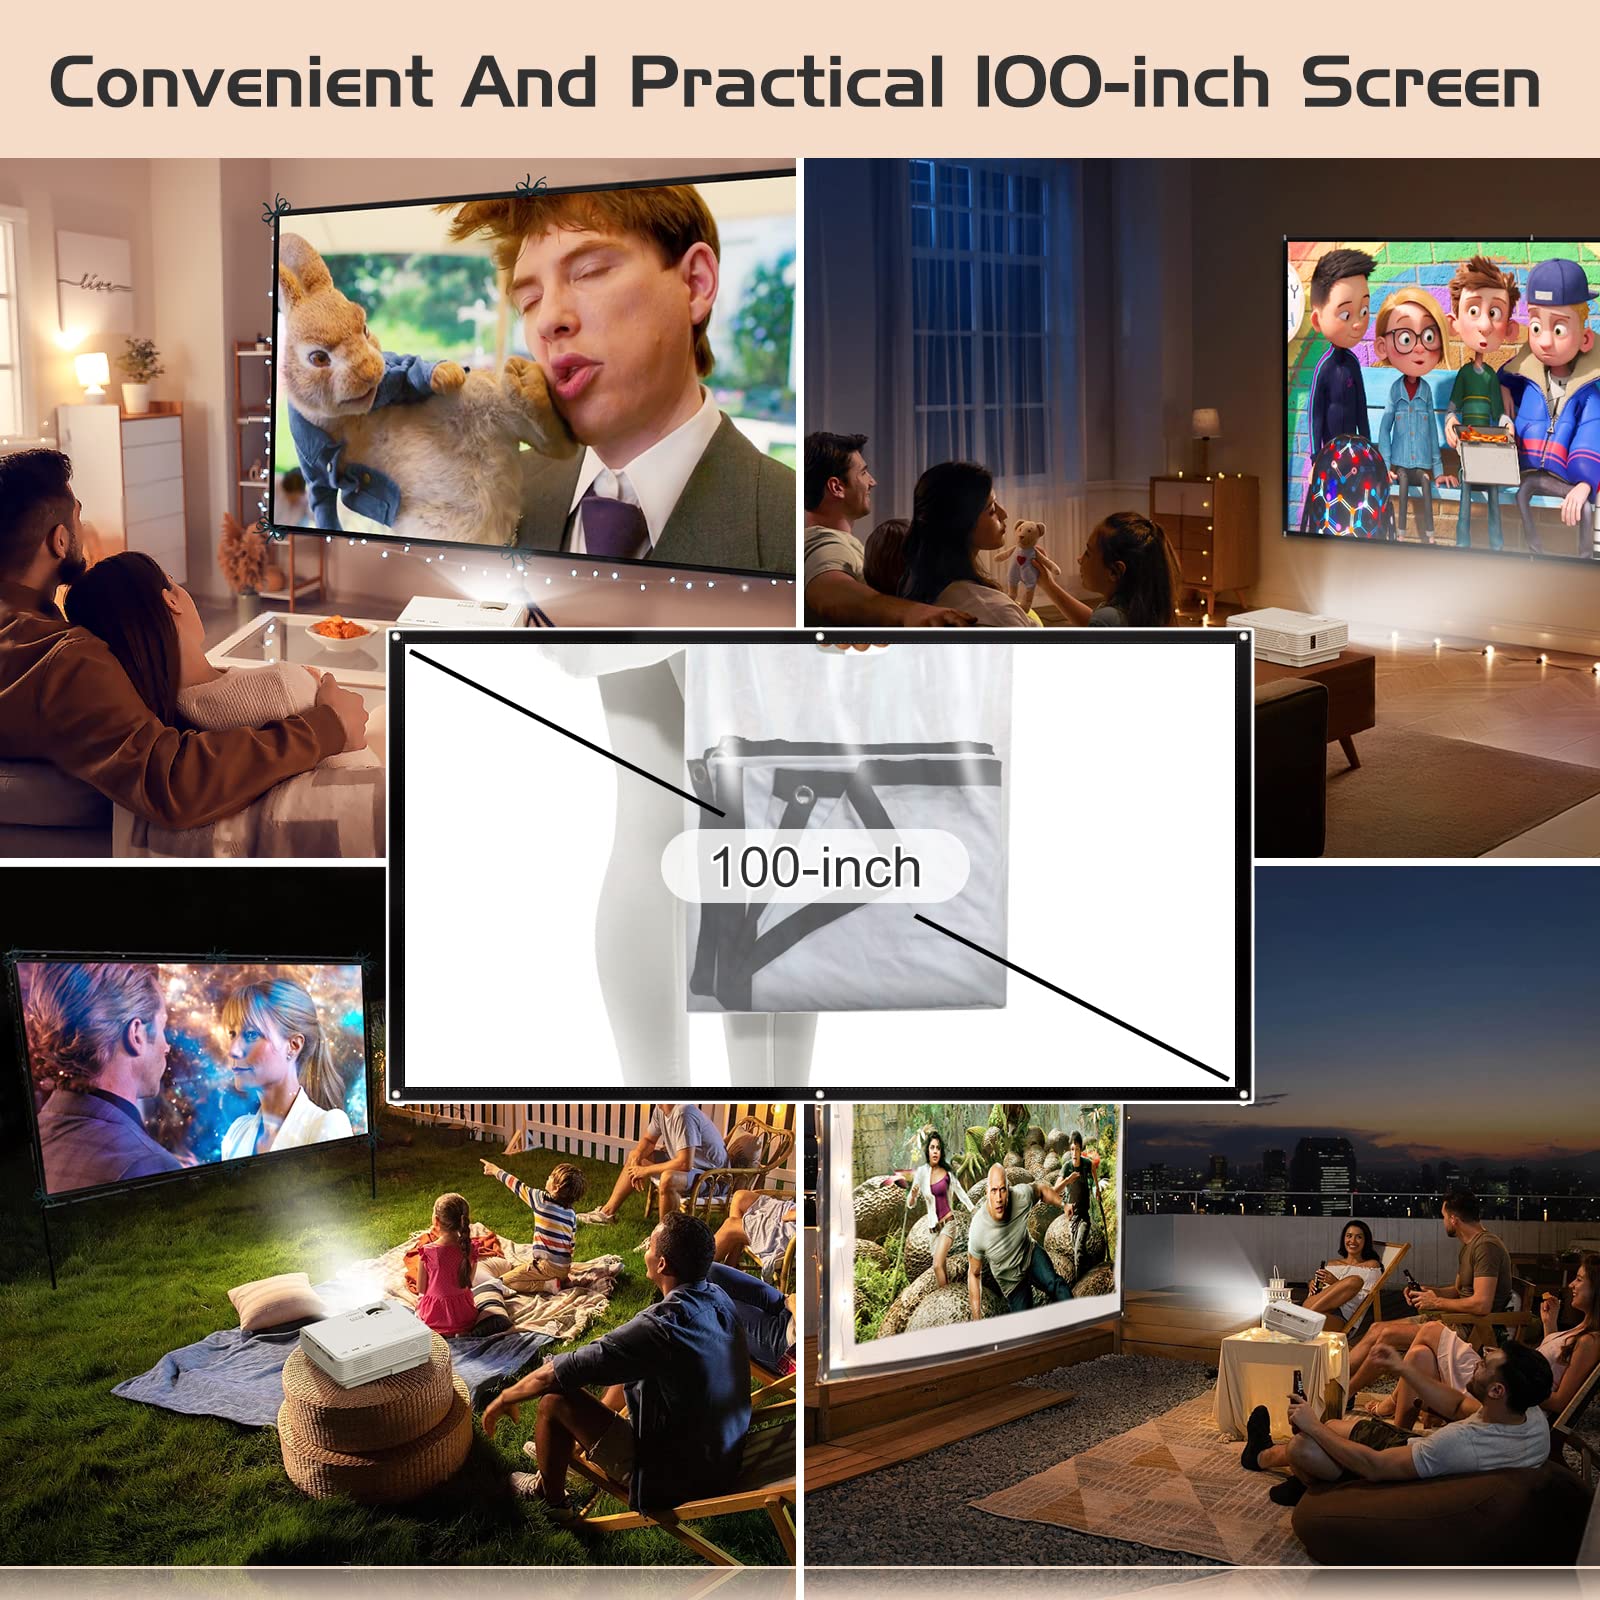 2023 Updated Mini Projector with Bluetooth and Projector Screen, 9500Lumens Full HD 1080P Supported Portable Video-Projector, Home Theater Movie Projector Compatible with HDMI,USB,AV,Laptop,Smartphone